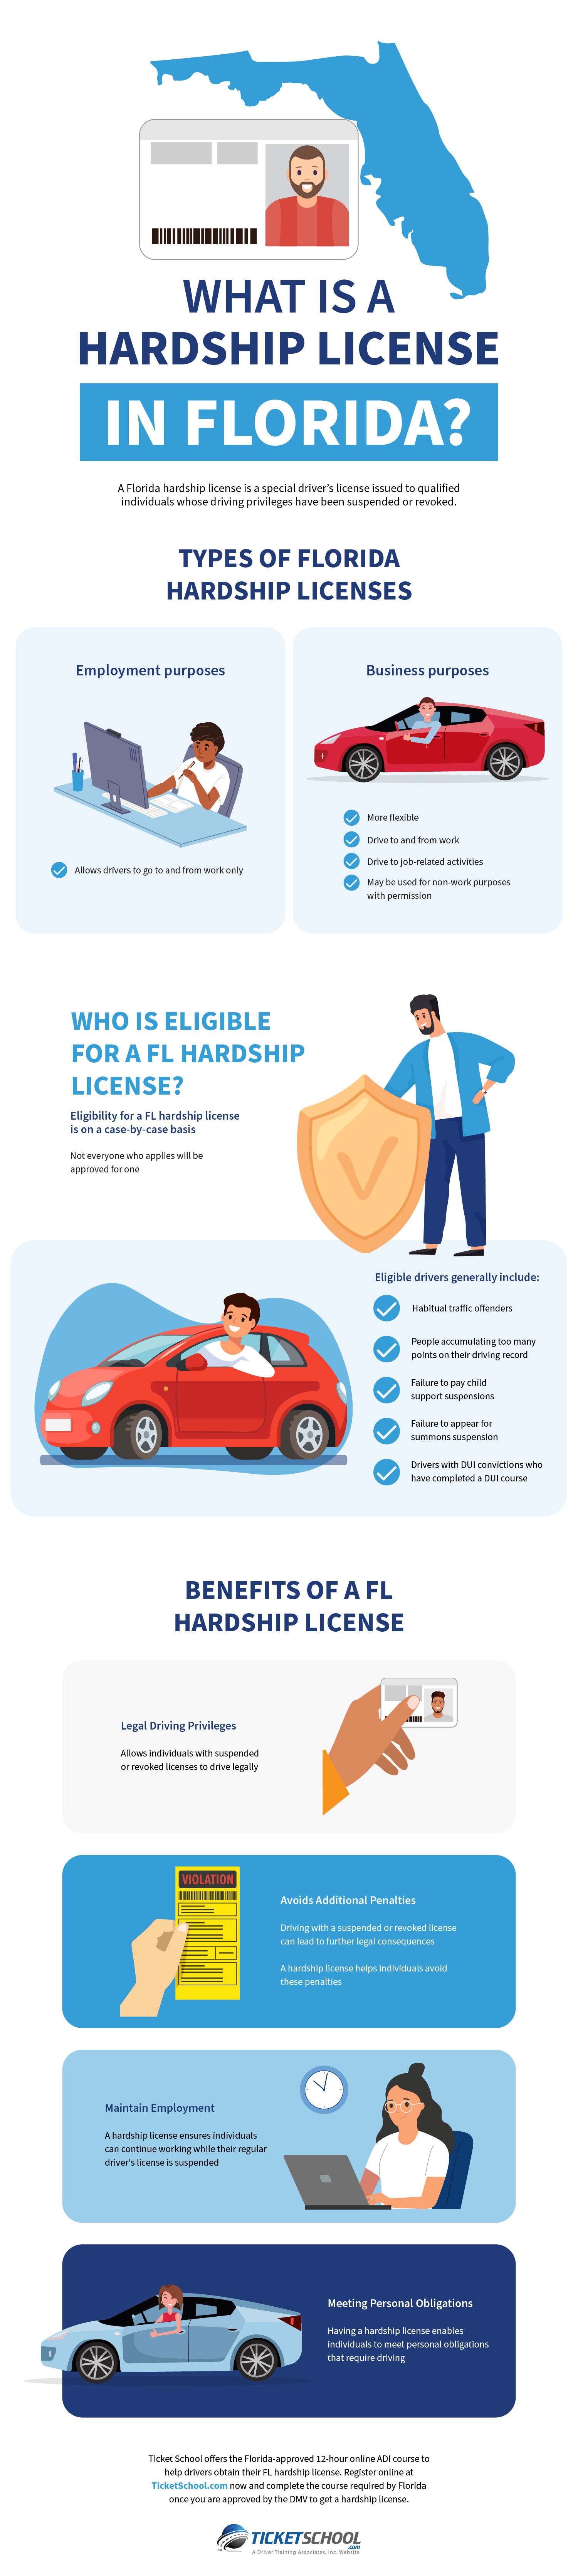 What Is a Hardship License in Florida Infographic